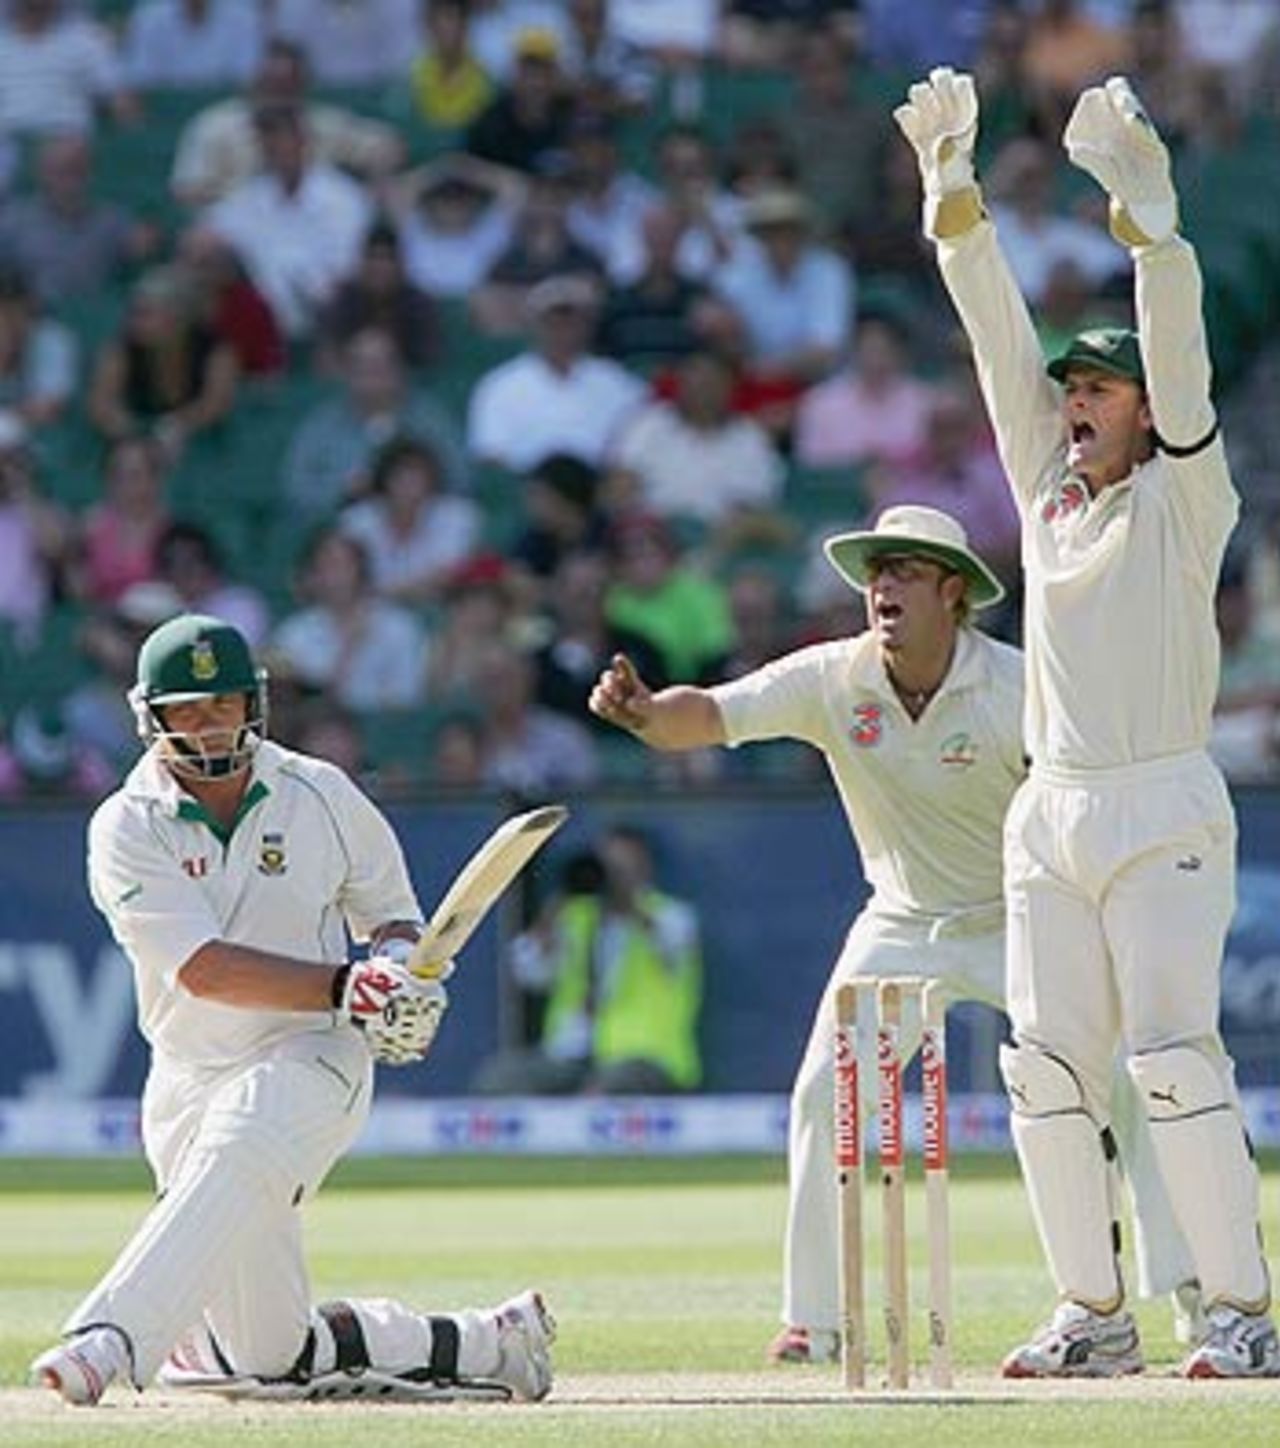 Shane Warne and Adam Gilchrist go up in appeal against Jacques Kallis, 2nd Test, Melbourne, 2nd day, December 27, 2005